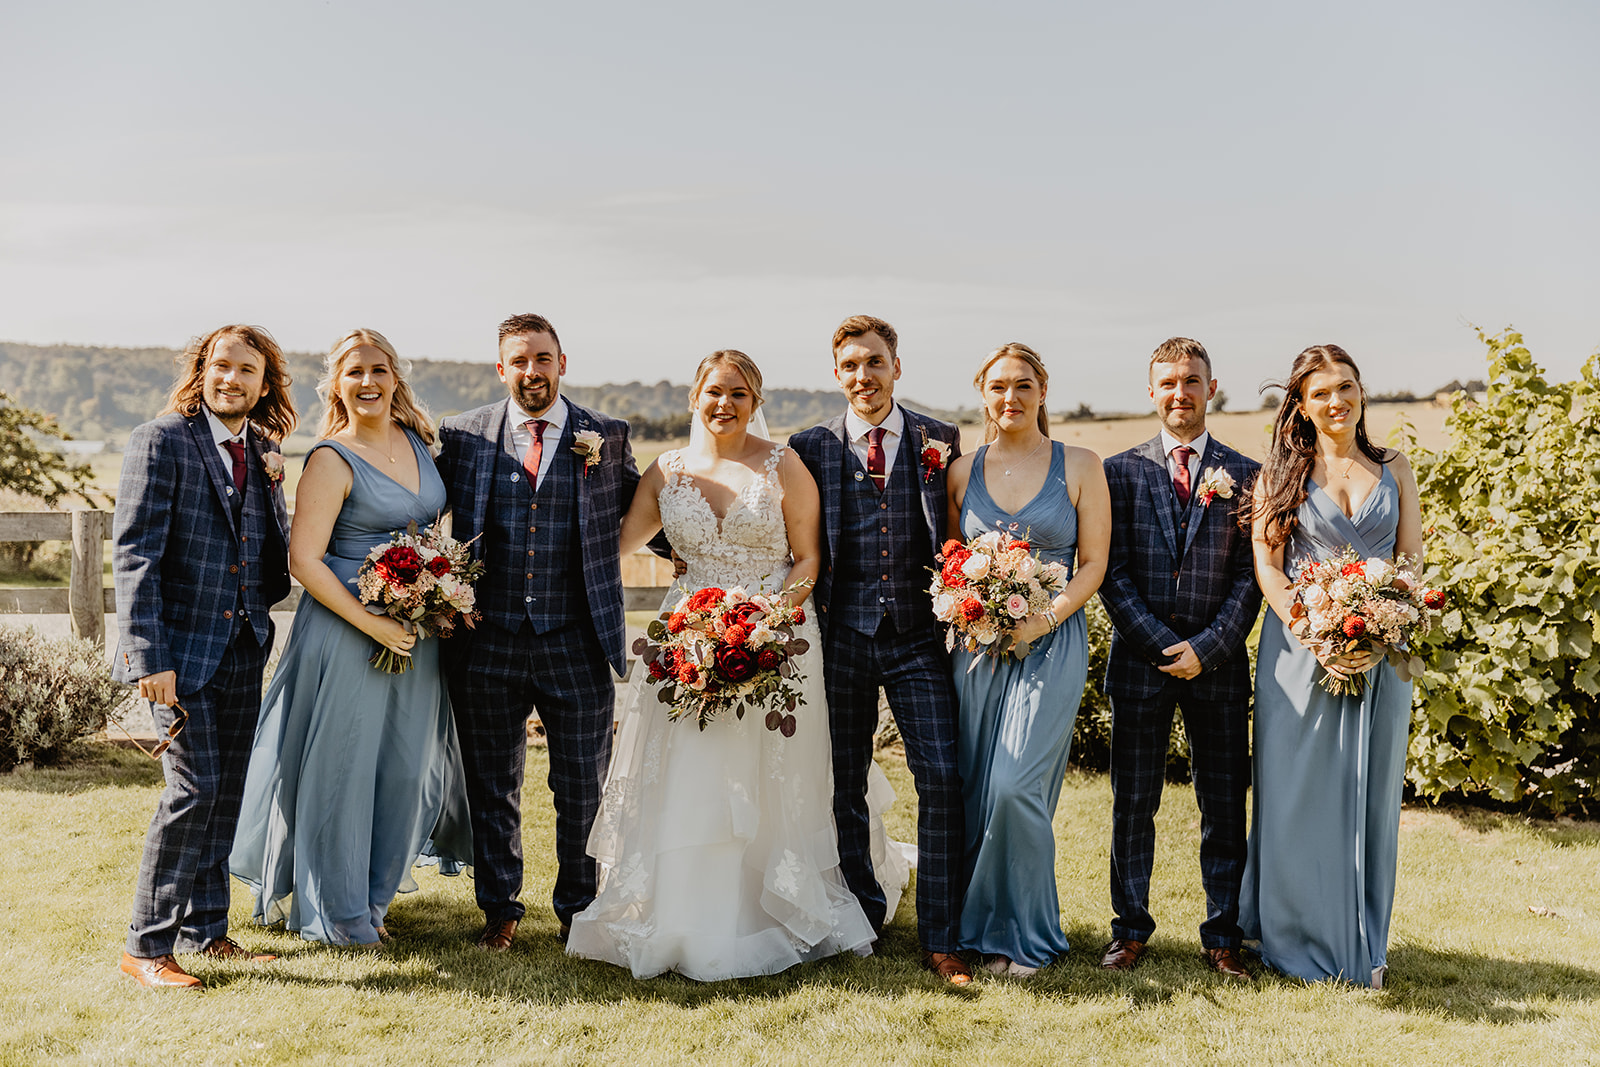 Wedding party group photos at a wedding at Long Furlong Barn, Sussex. By OliveJoy Photography.